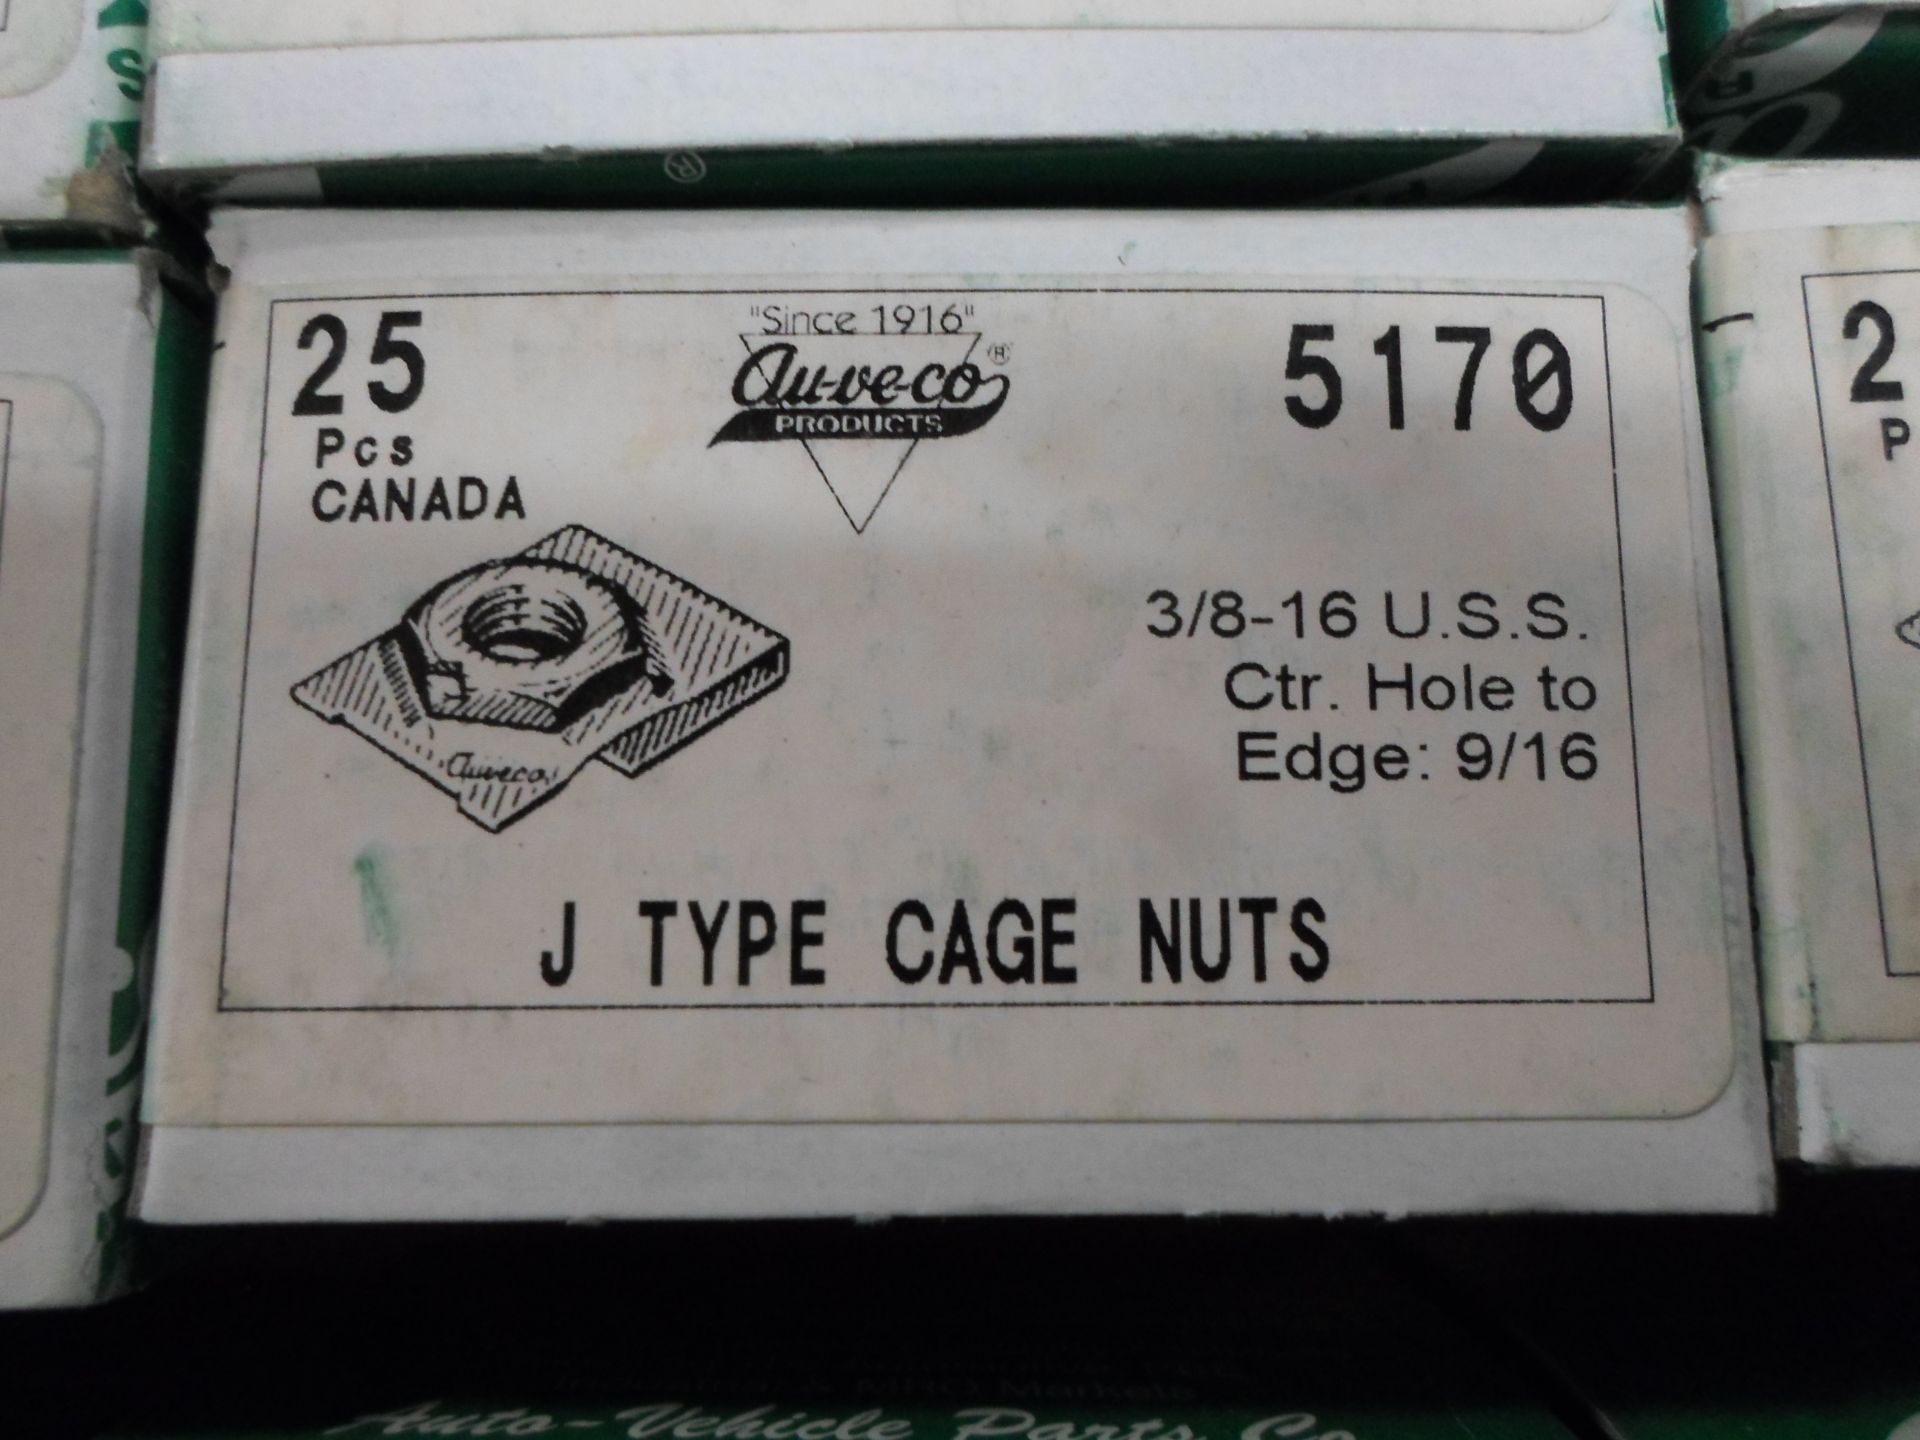 LOT OF 14 AUVECO J TYPE CAGE NUTS 3/8-16 U.S.S CTR. HOLE TO EDGE: 9/16 25 IN EACH BOX - Image 2 of 2